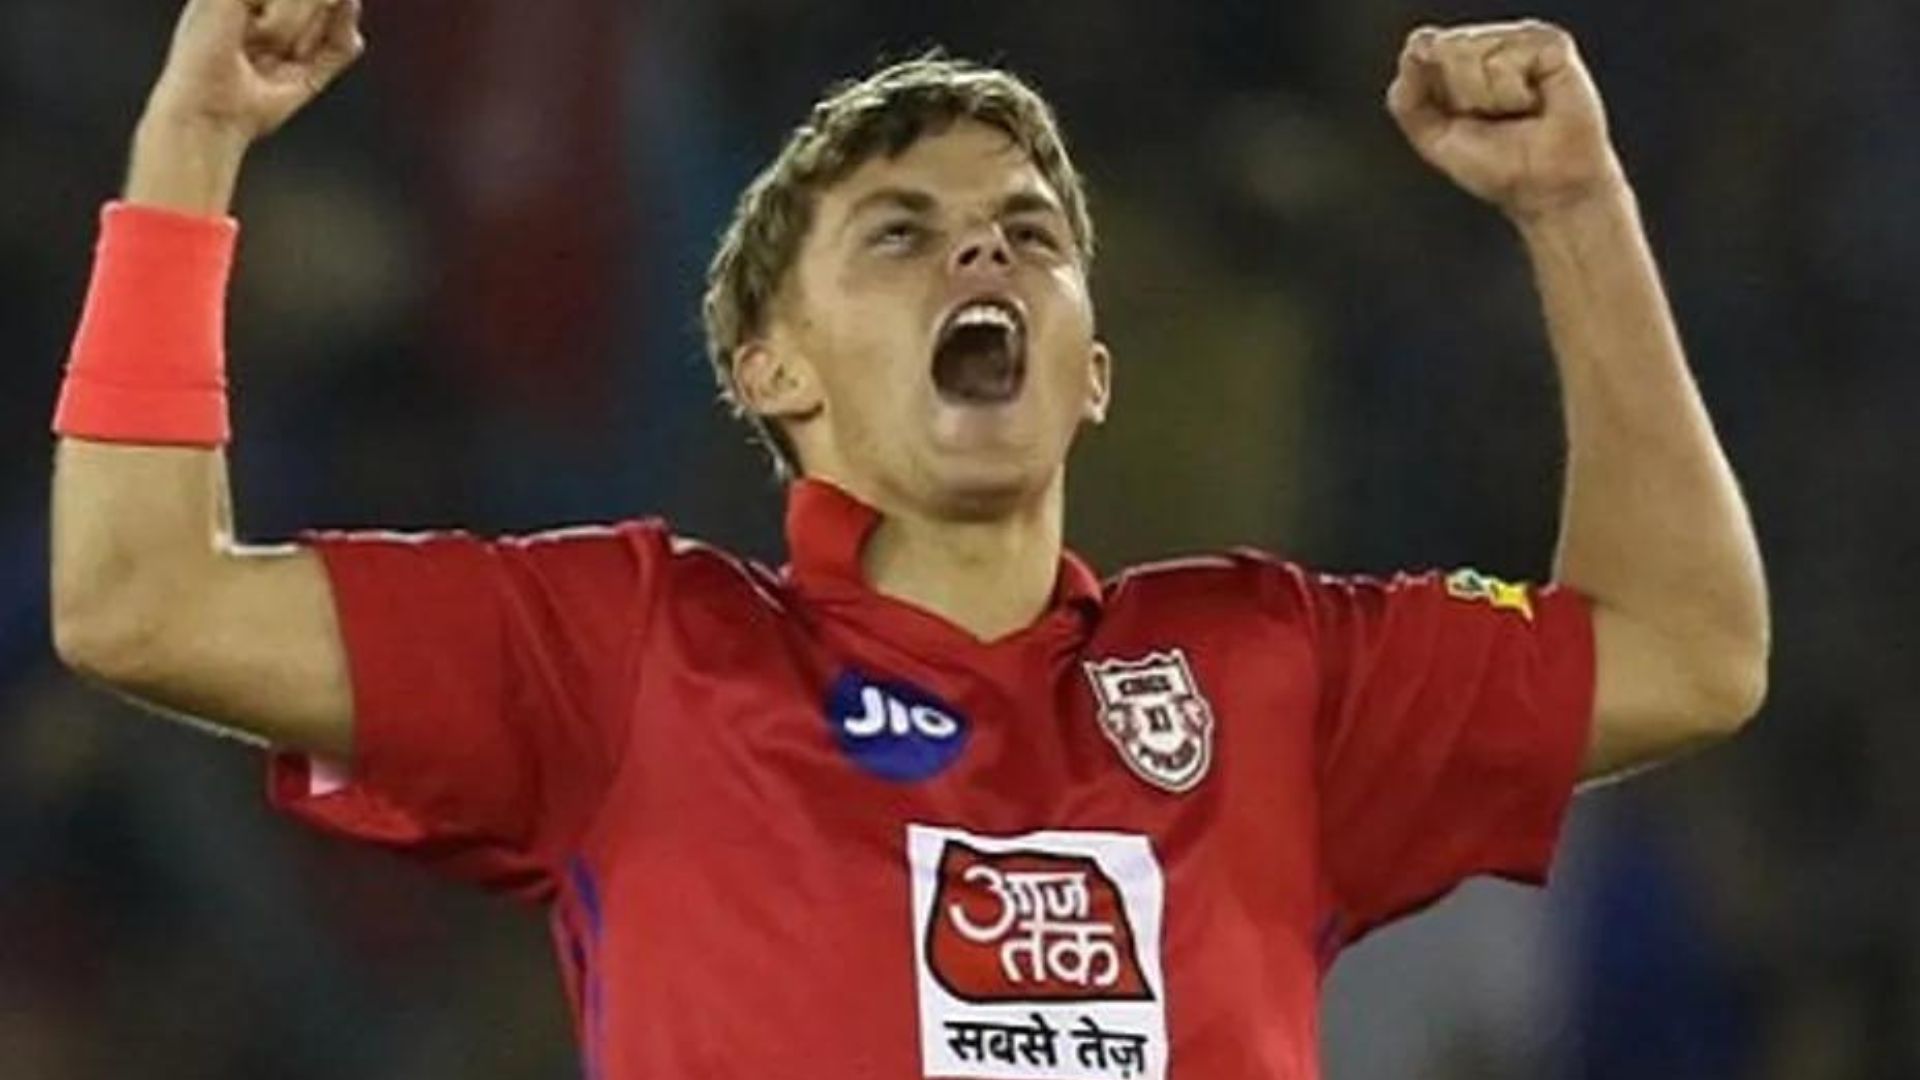 Sam Curran has previously played for the Punjab Kings. [P/C: iplt20.com]